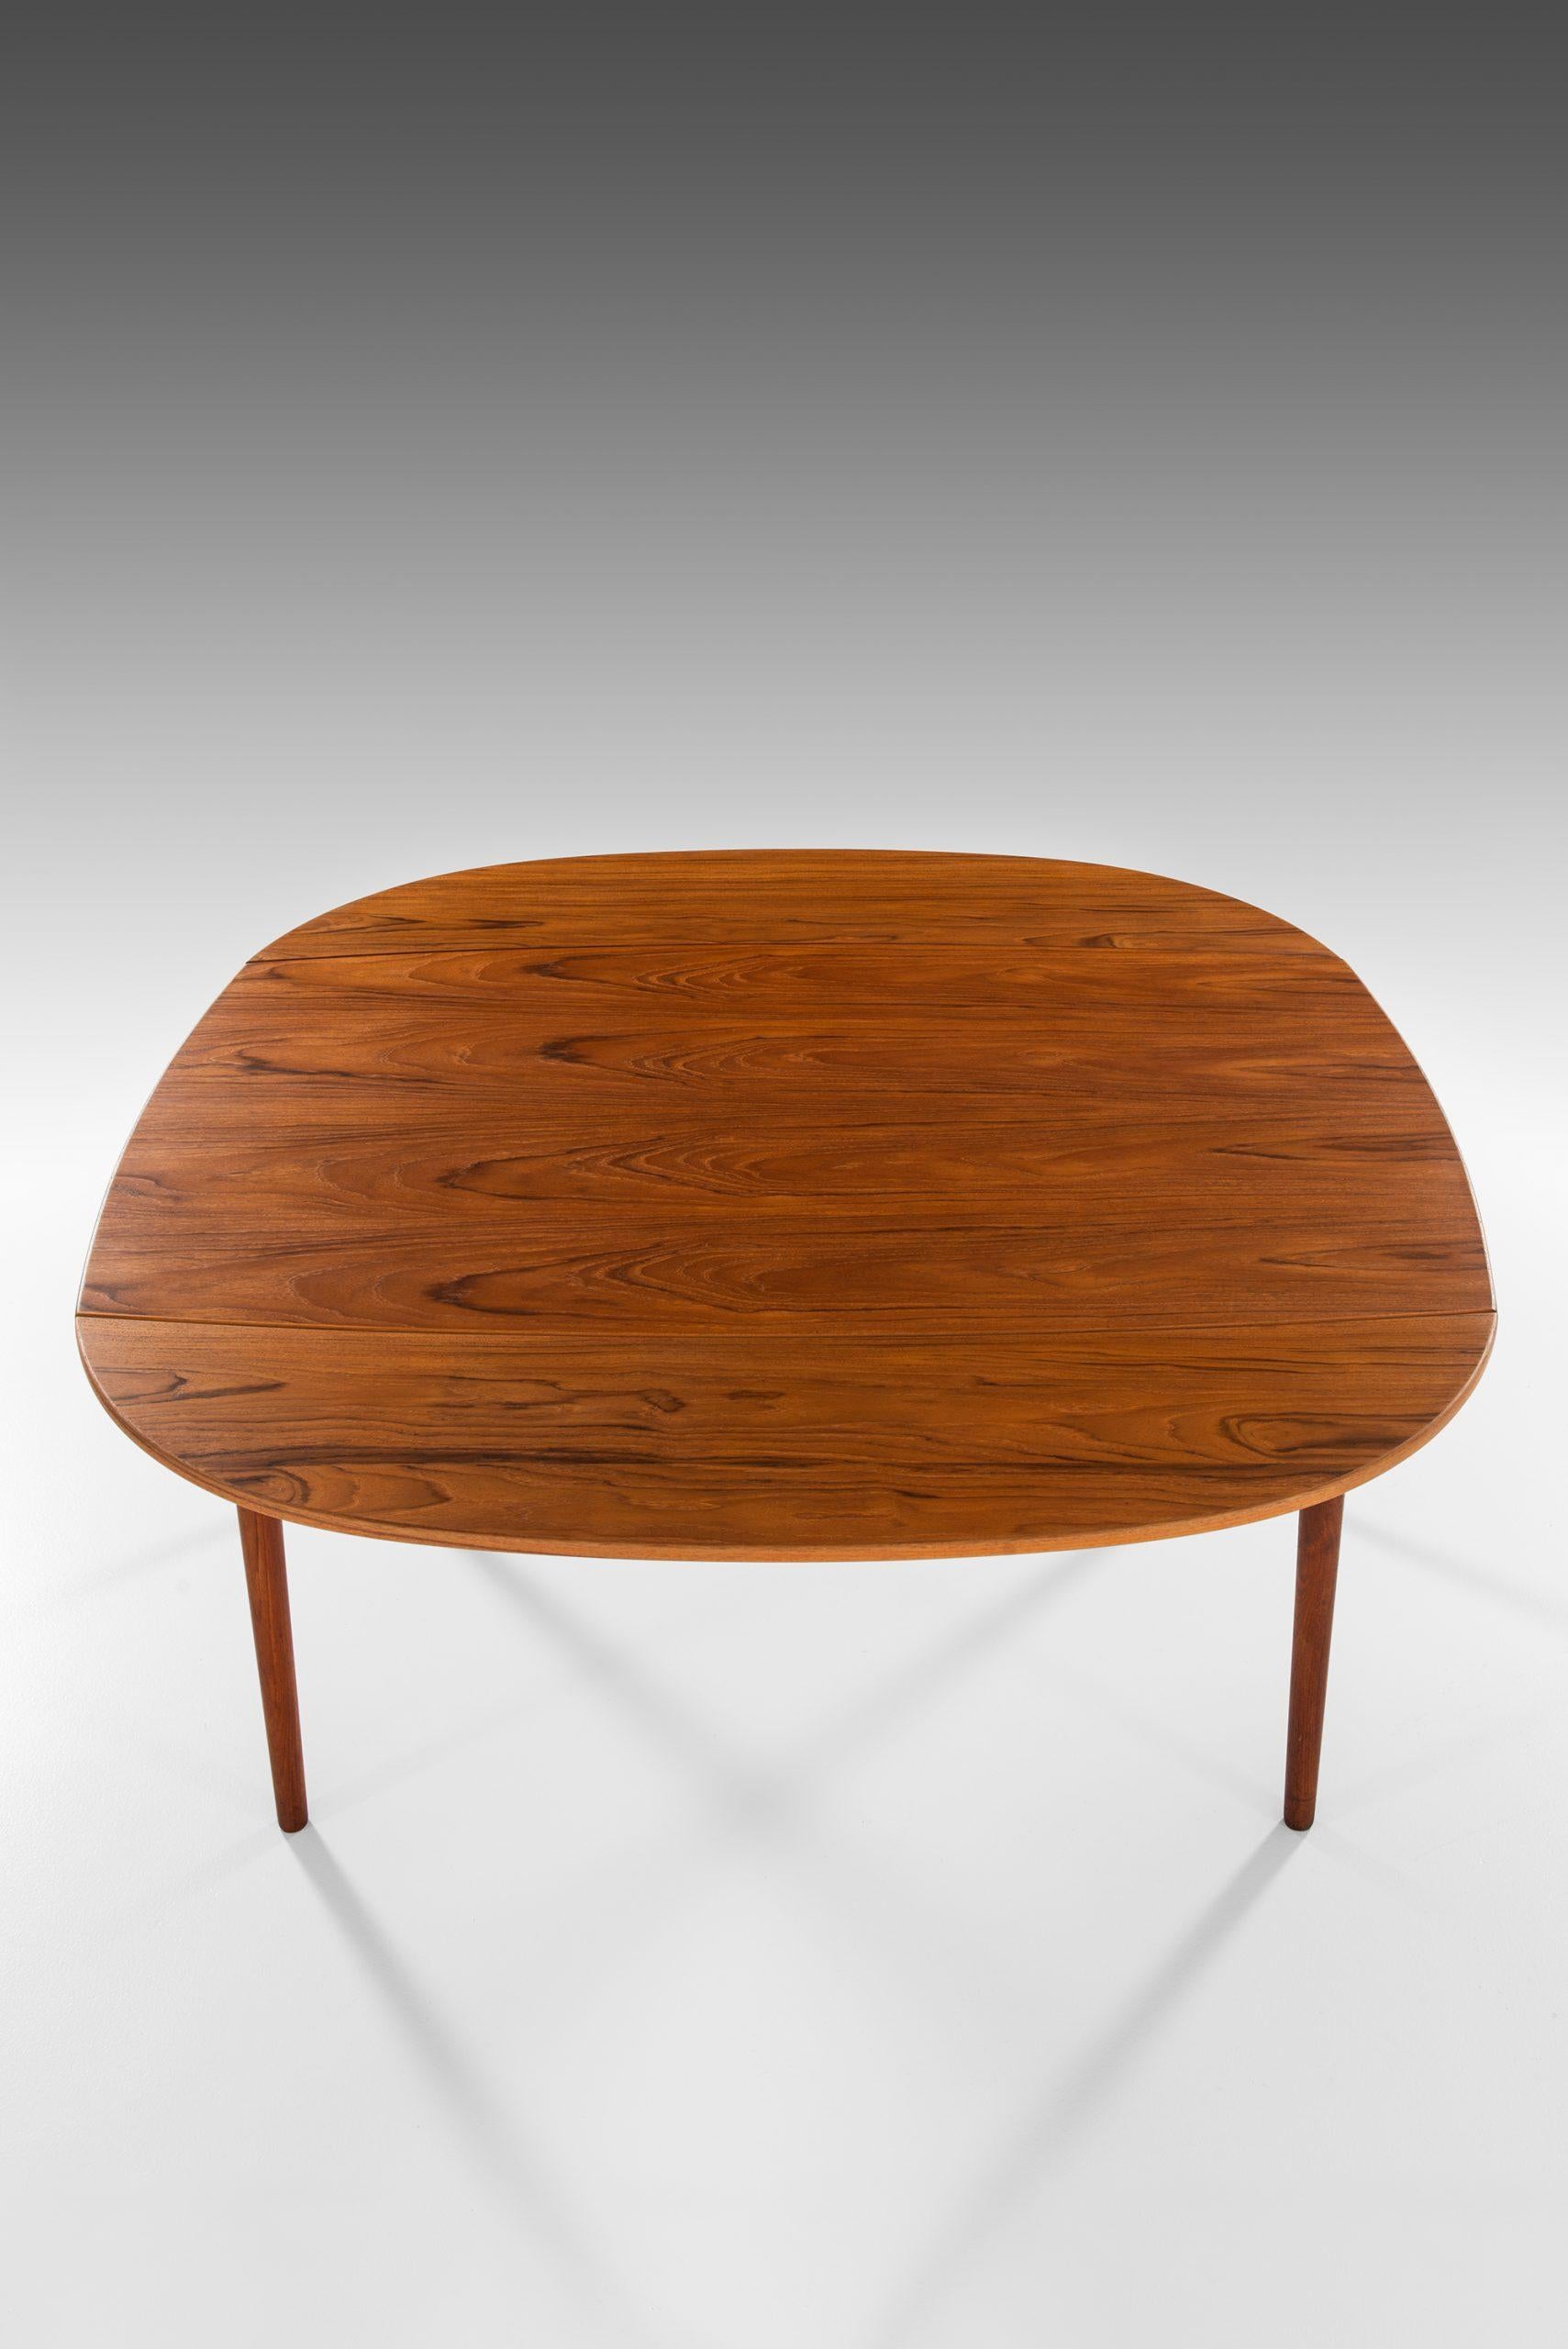 Mid-20th Century Dining Table in the Style of Finn Juhl Produced in Denmark For Sale